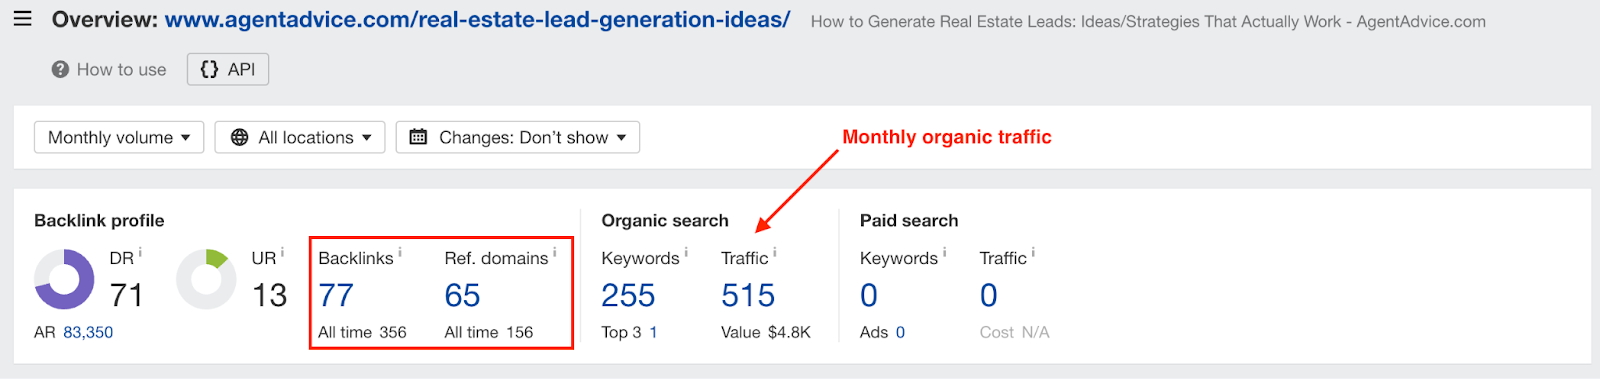 Ahrefs screenshot showing organic traffic of 515 for expert insights post.